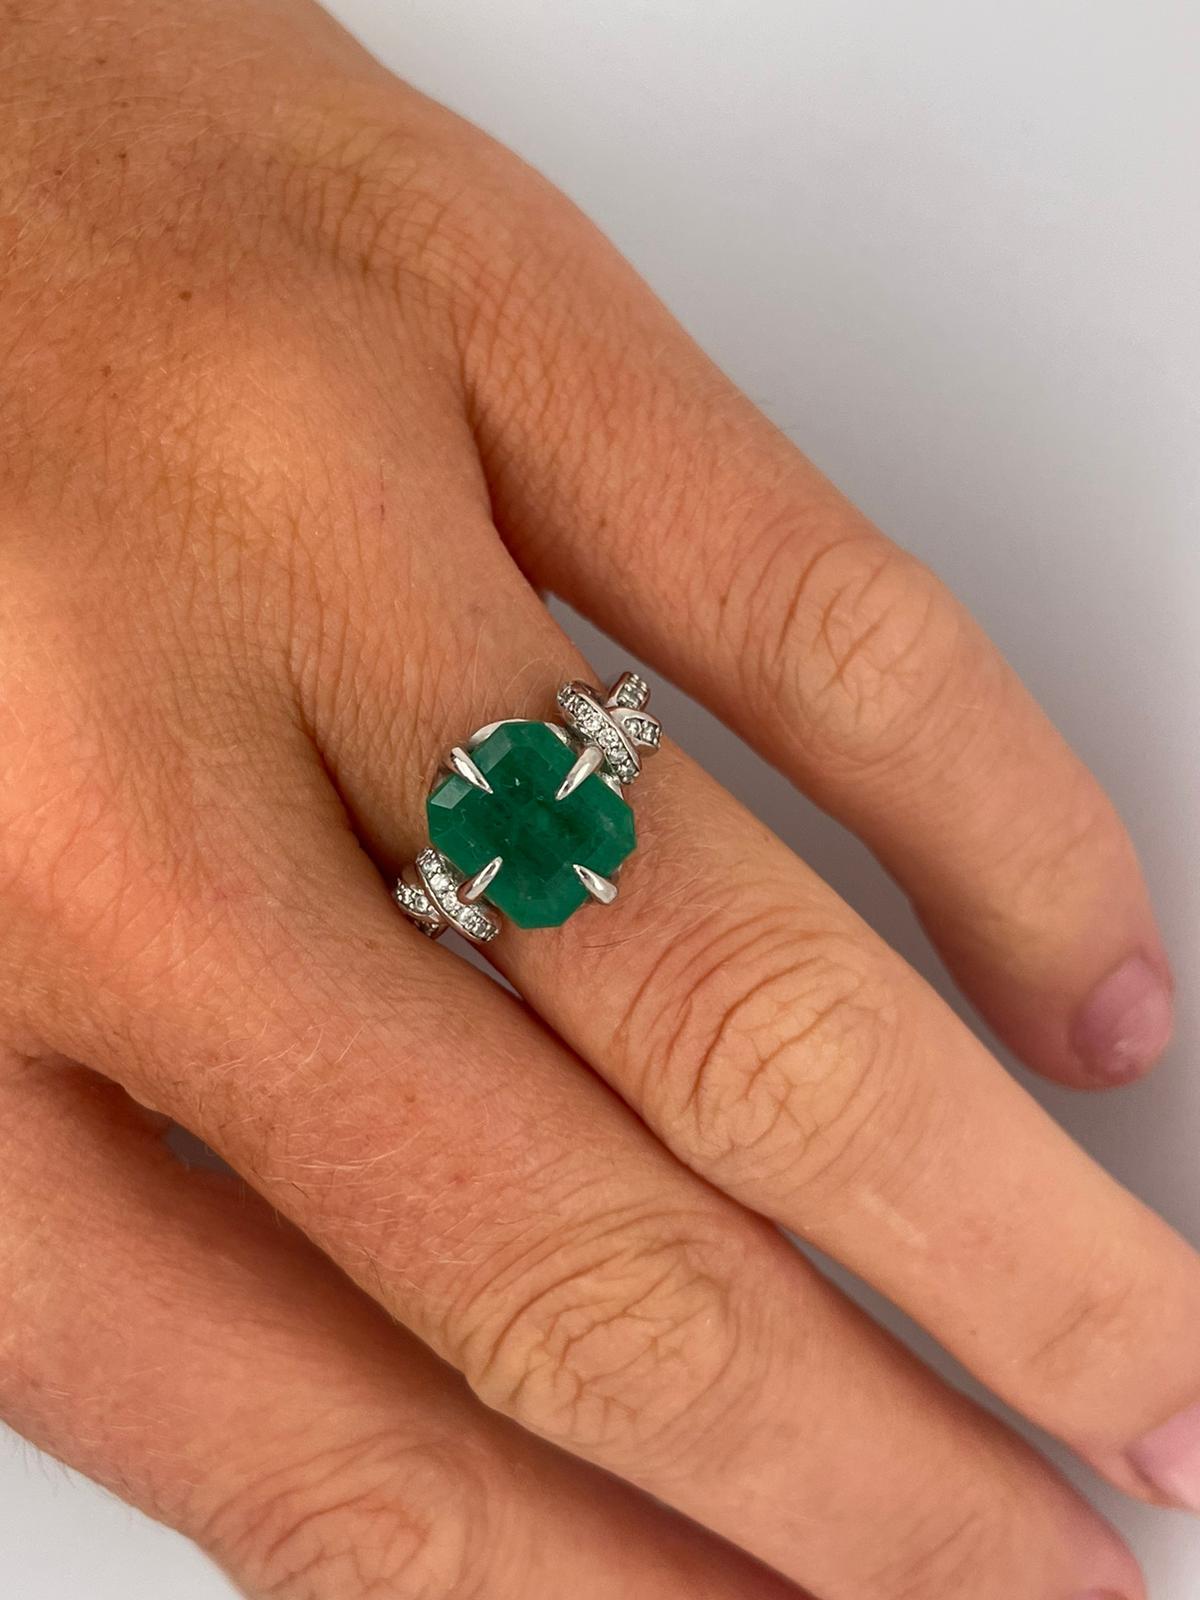 For Sale:  4ct Emerald solitaire in platinum with diamond knots  7